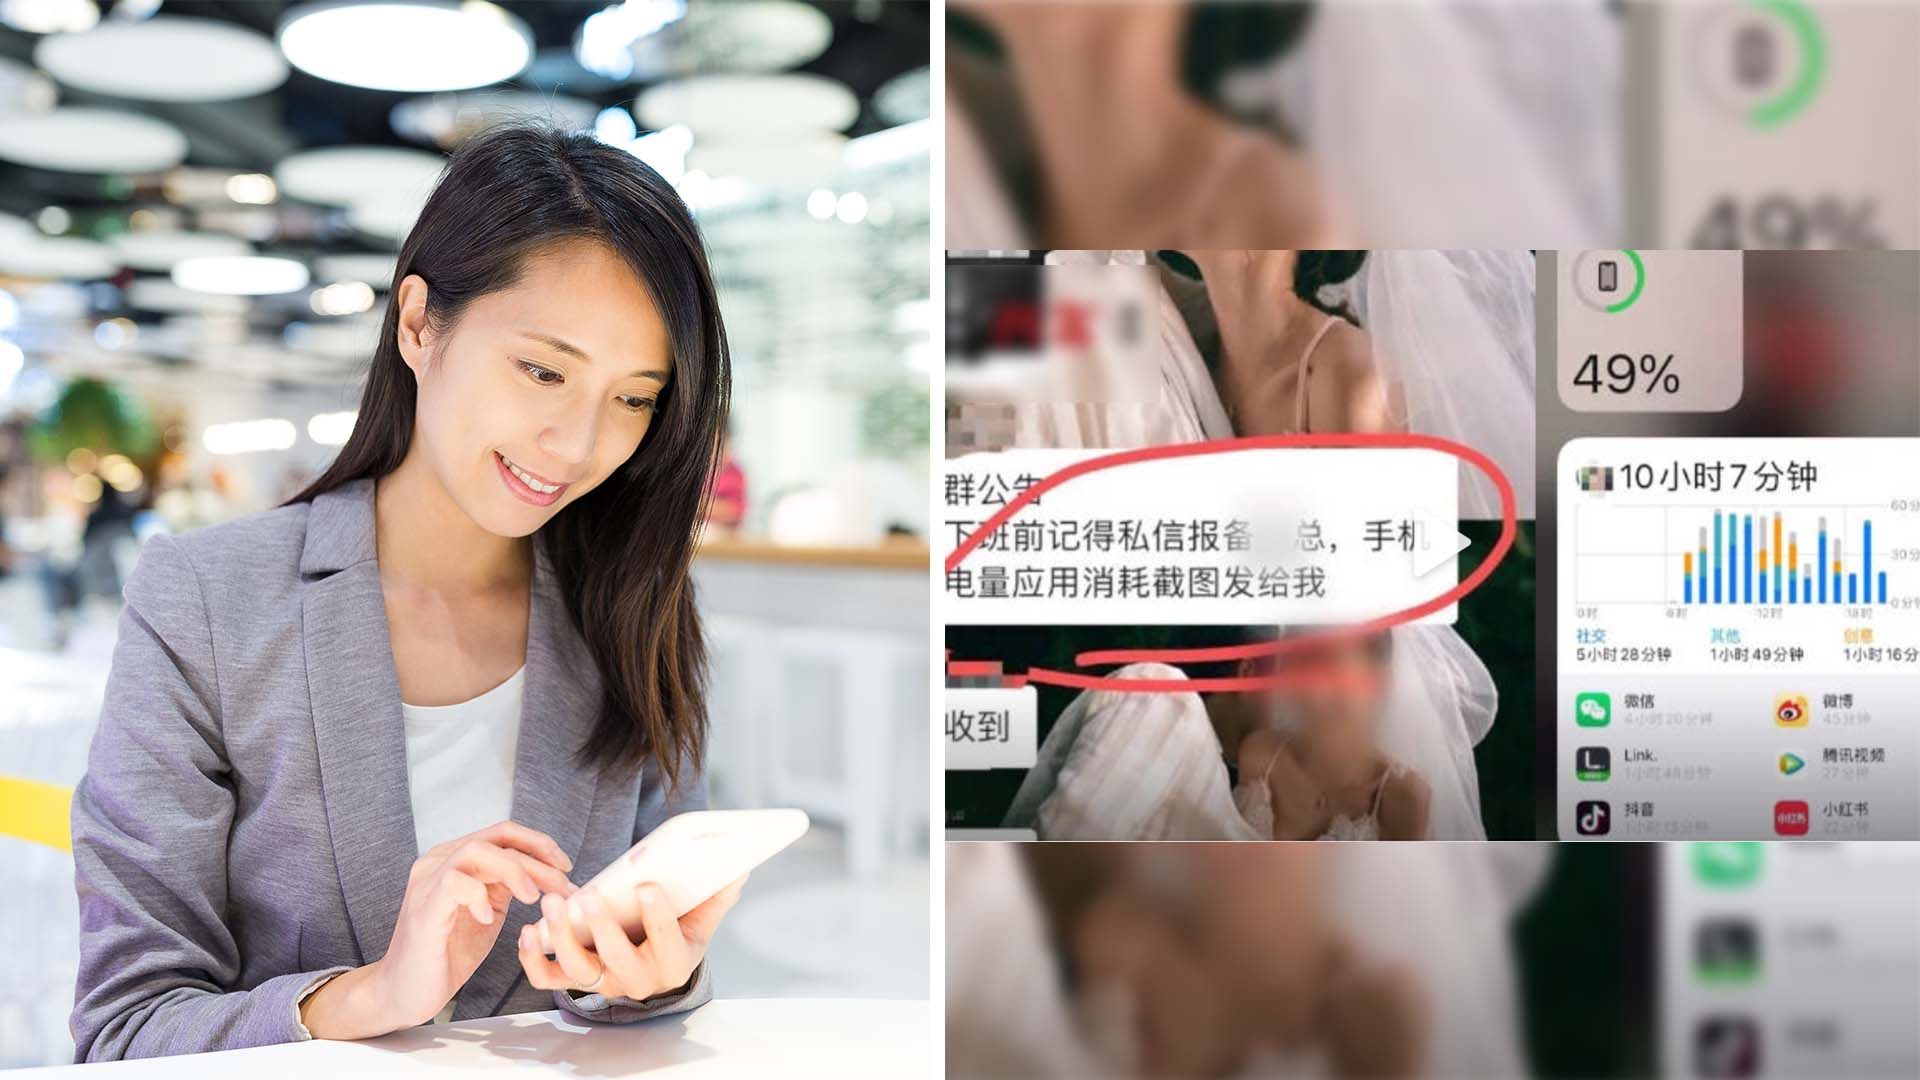 A Chinese company sparked privacy debates after it asked to check employees’ battery power before they could leave work. Photo: SCMP composite